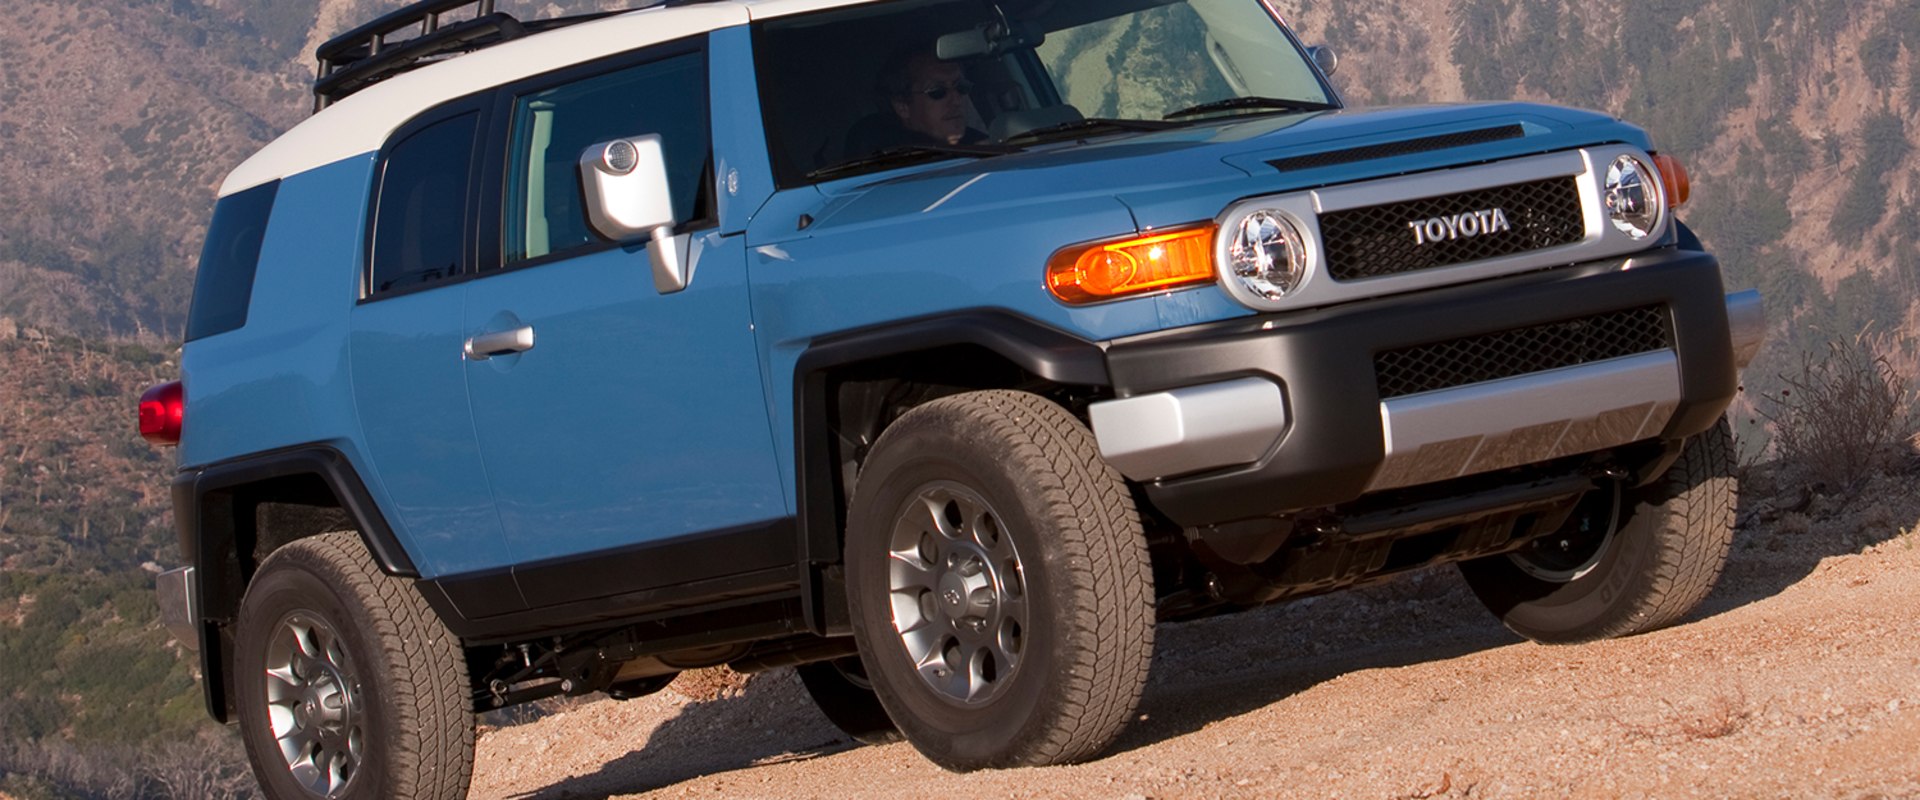 Is the Toyota FJ Cruiser Still in Production?